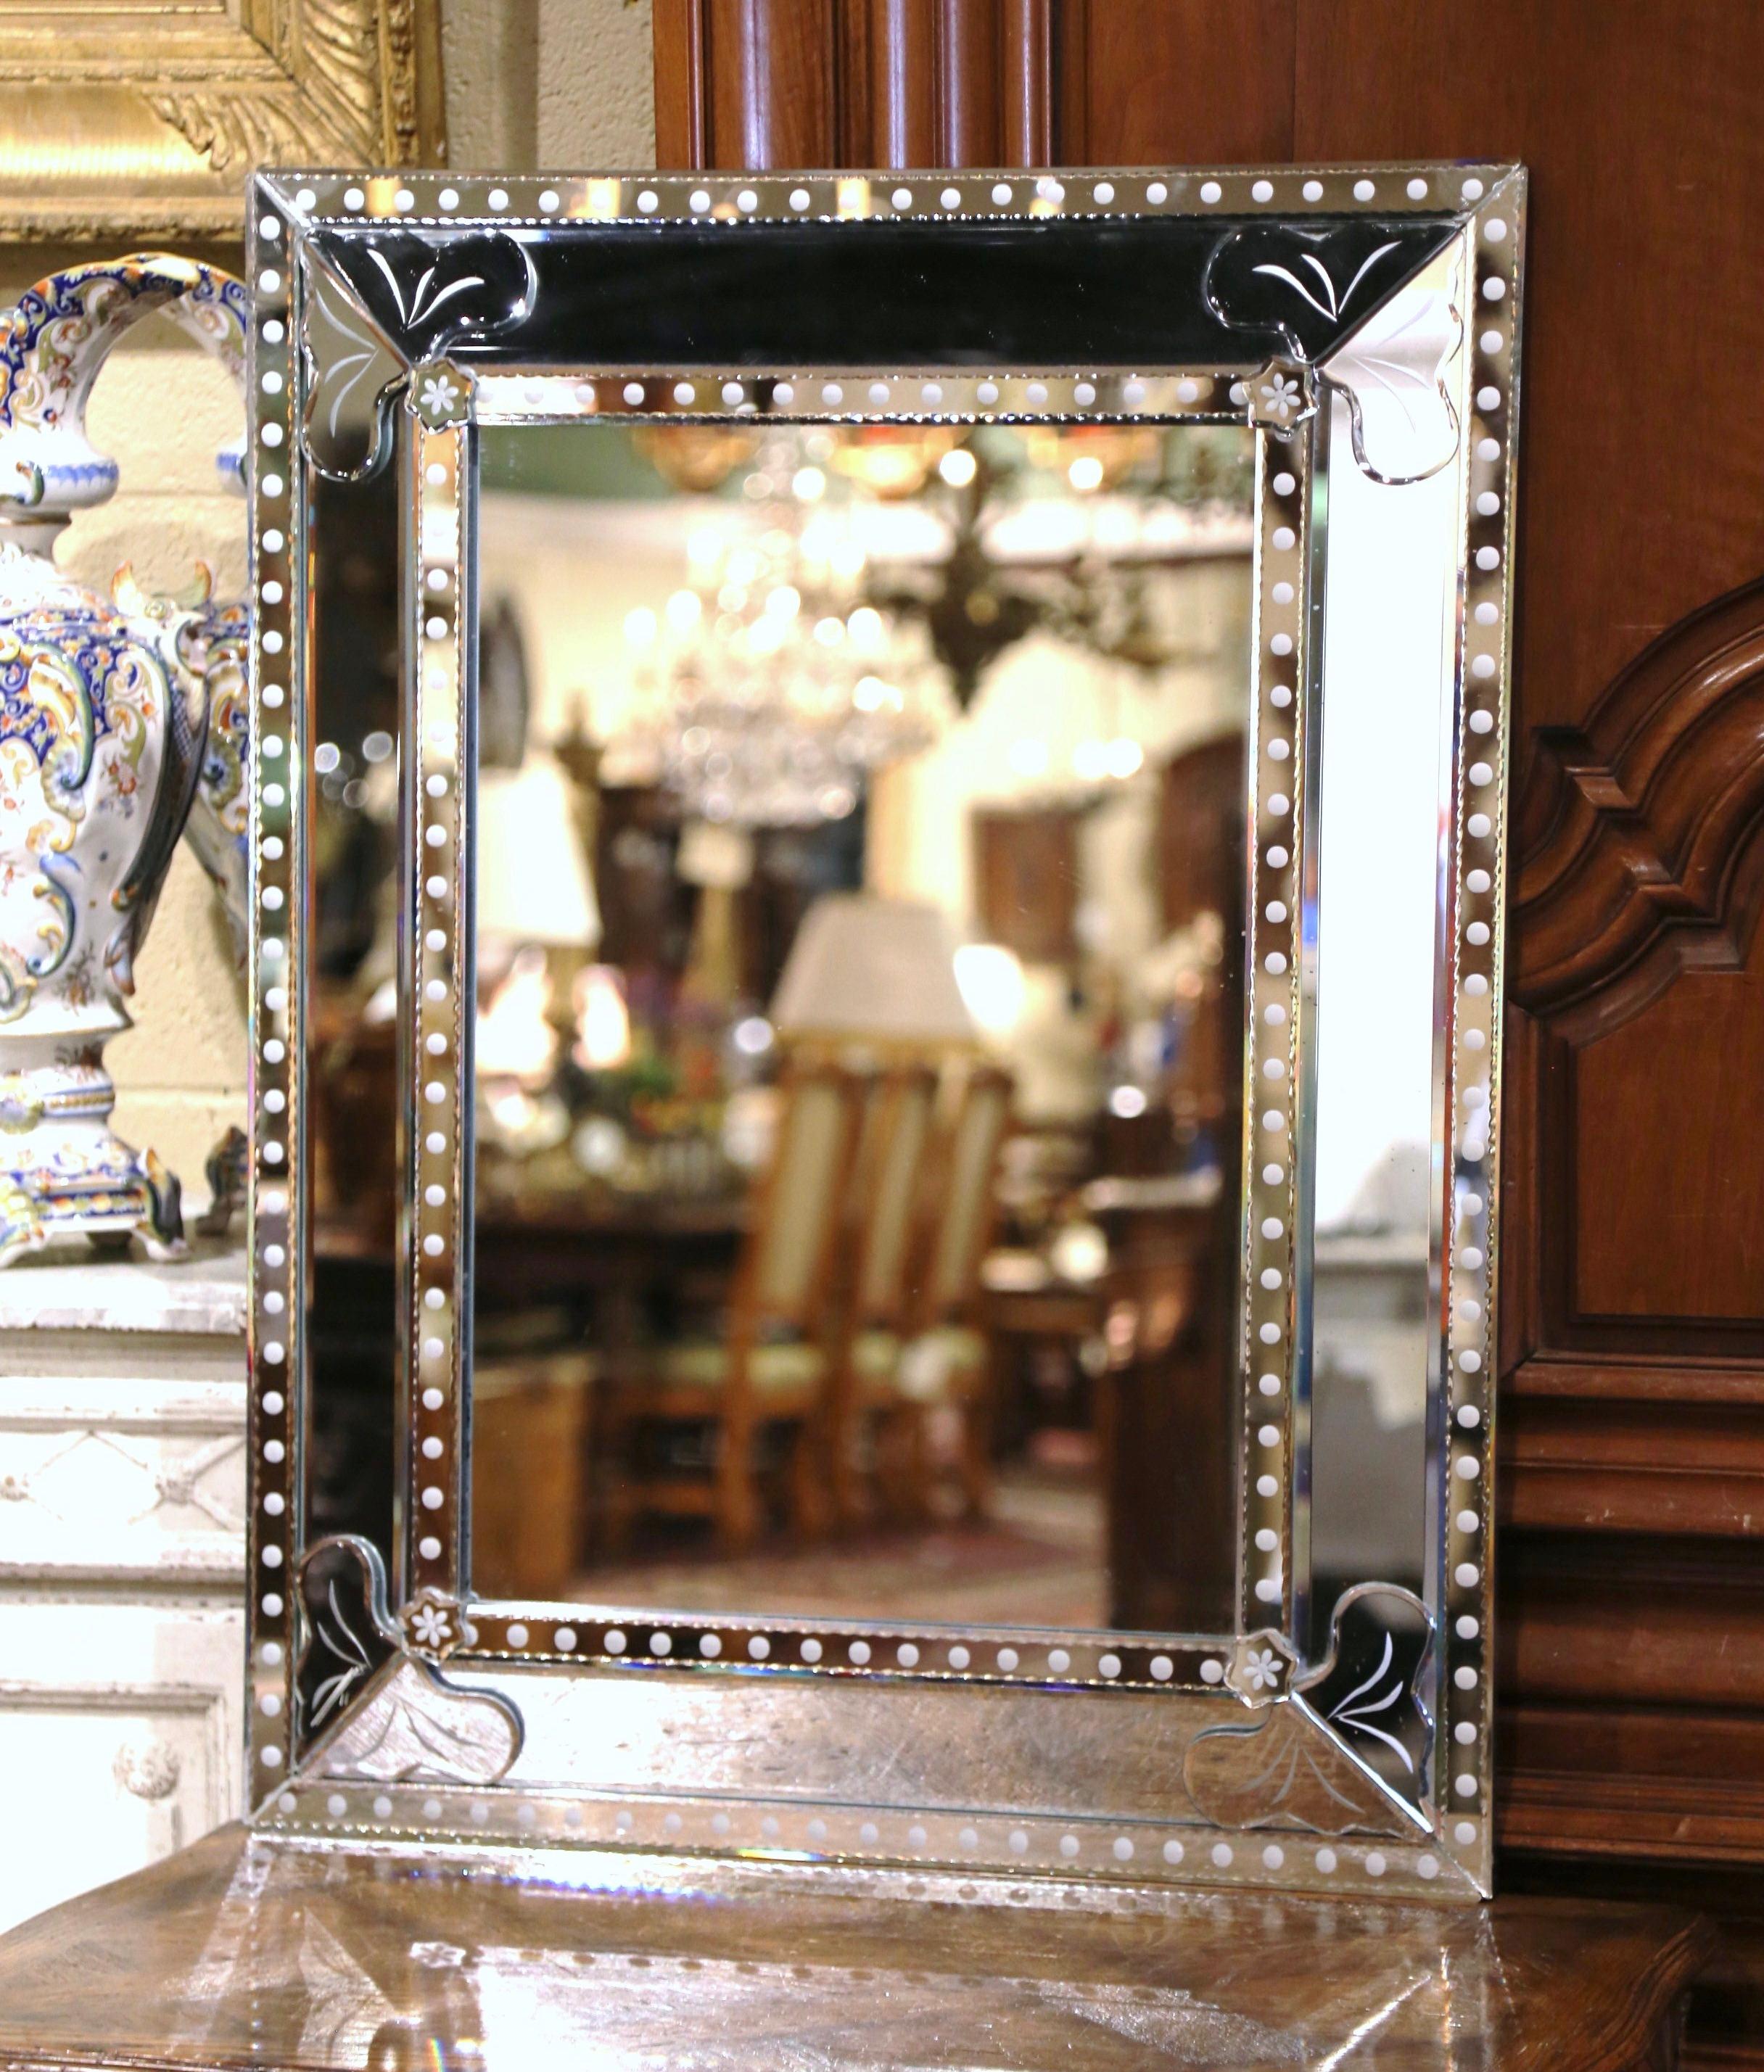 Decorate a powder room or a bedroom with this elegant, antique Venetian mirror from Italy. Crafted circa 1950 and rectangular in shape, the large overlay mirror features acanthus leaf decor in each corner, embellished with floral rosettes. Each